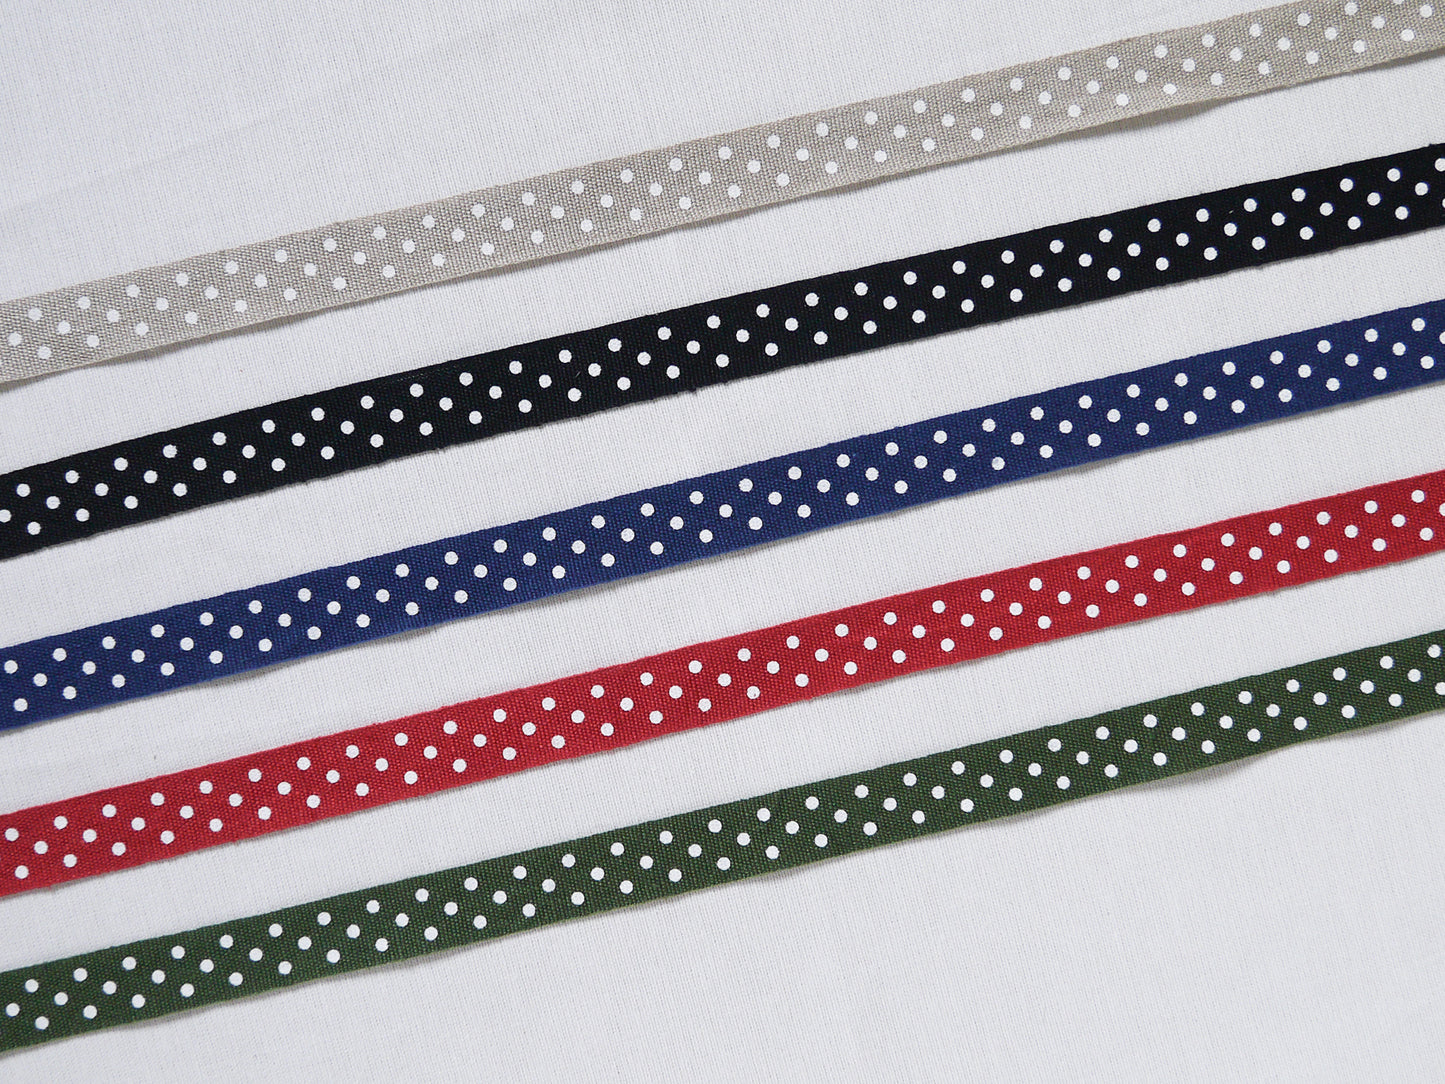 20mm Polka dots ribbon/ tape in 100% washed linen